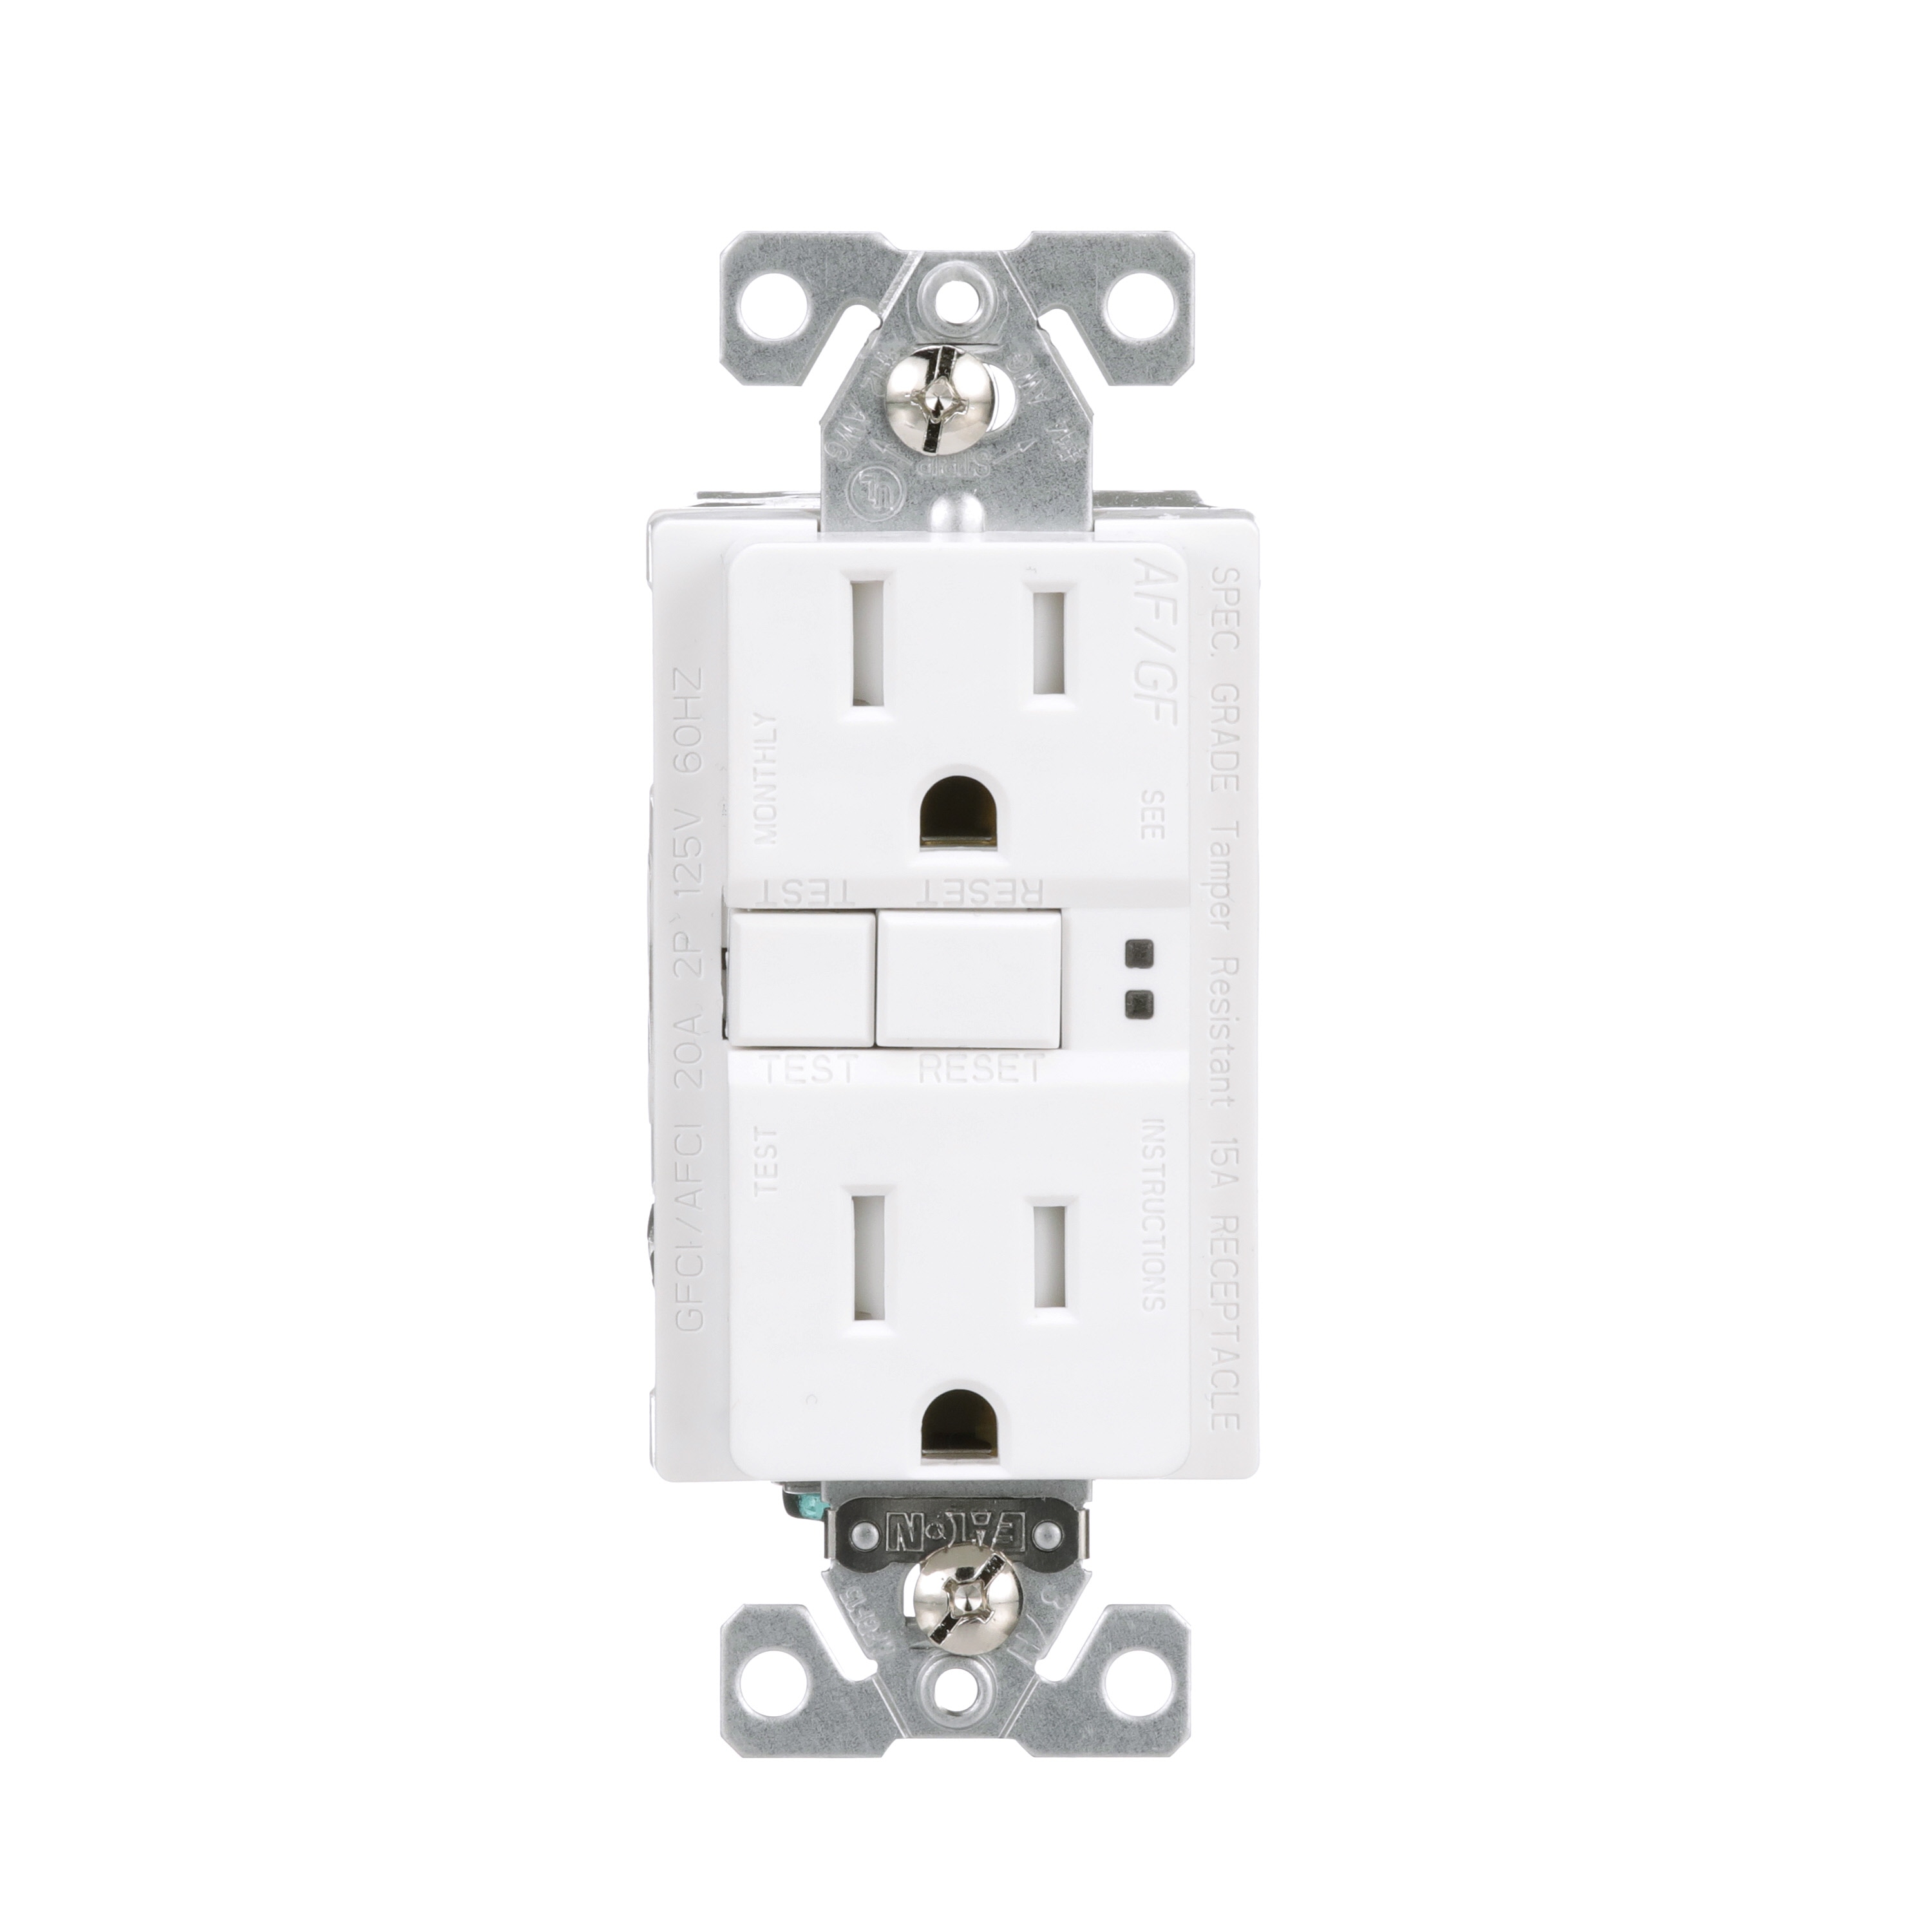 Electrical Outlet Repair & Installation Services: GFCI, AFCI, USB & More!